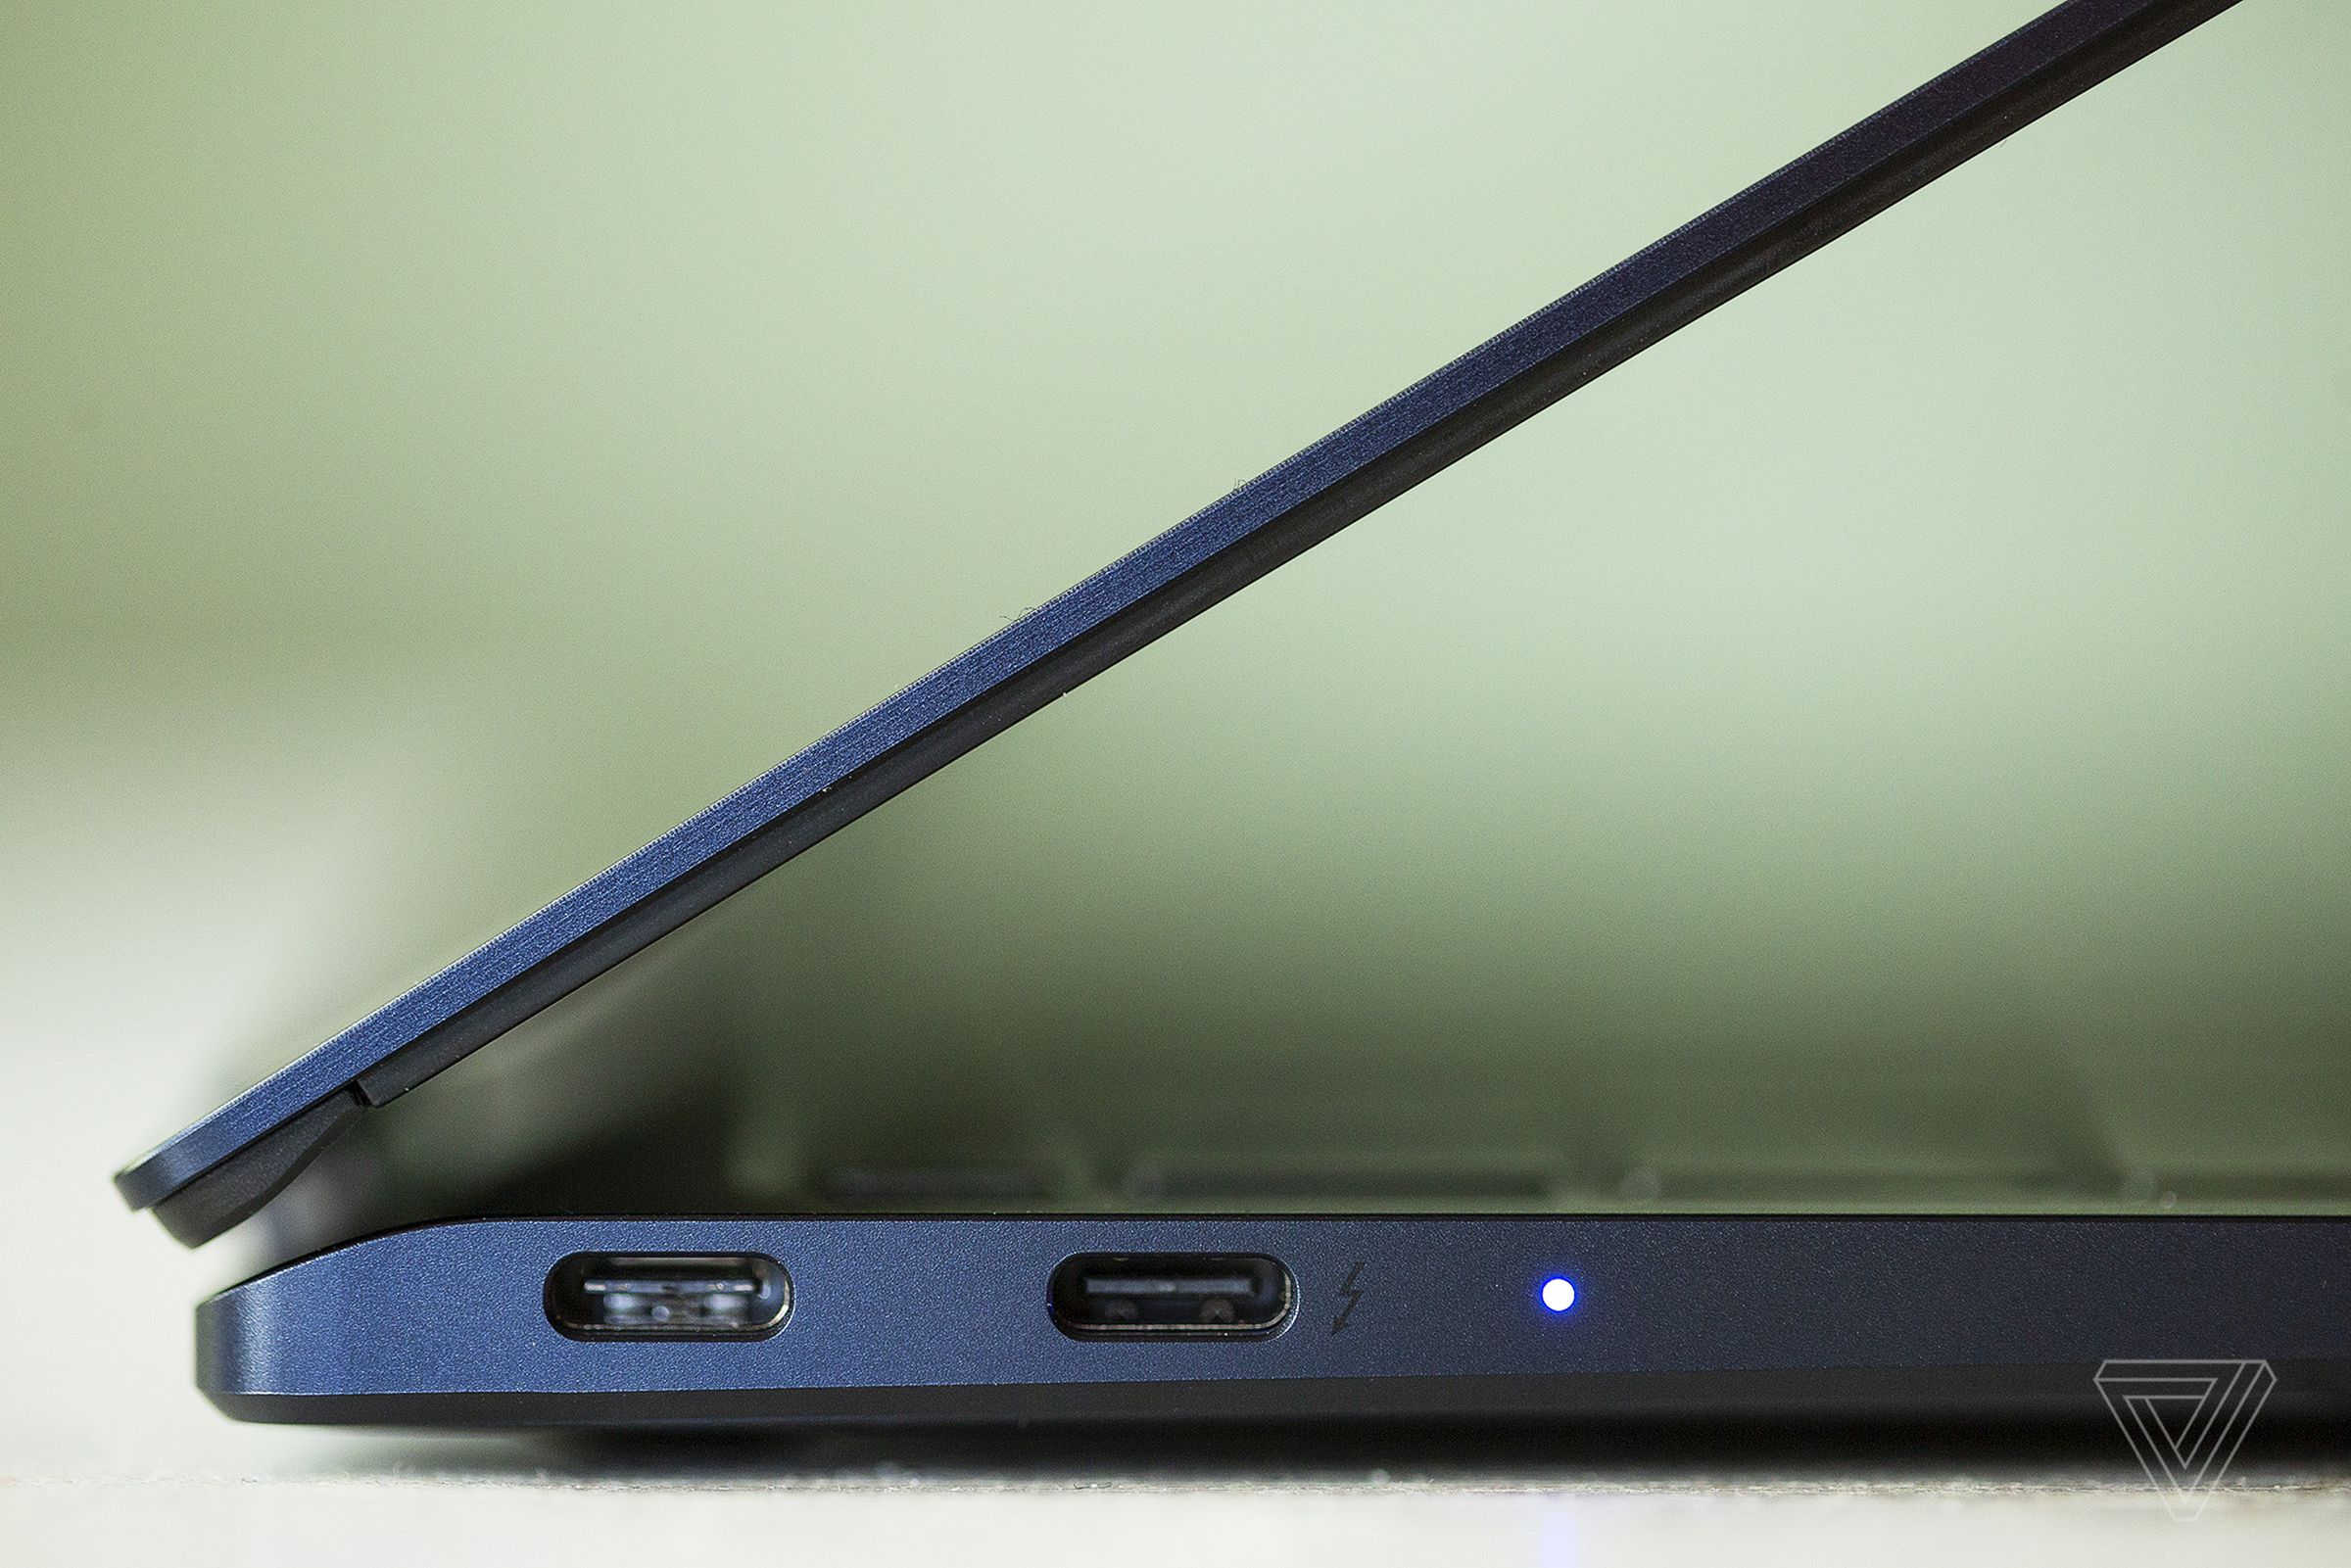 The left side of the Samsung Galaxy Book Pro 360 (15-inch). The battery indicator light is on.